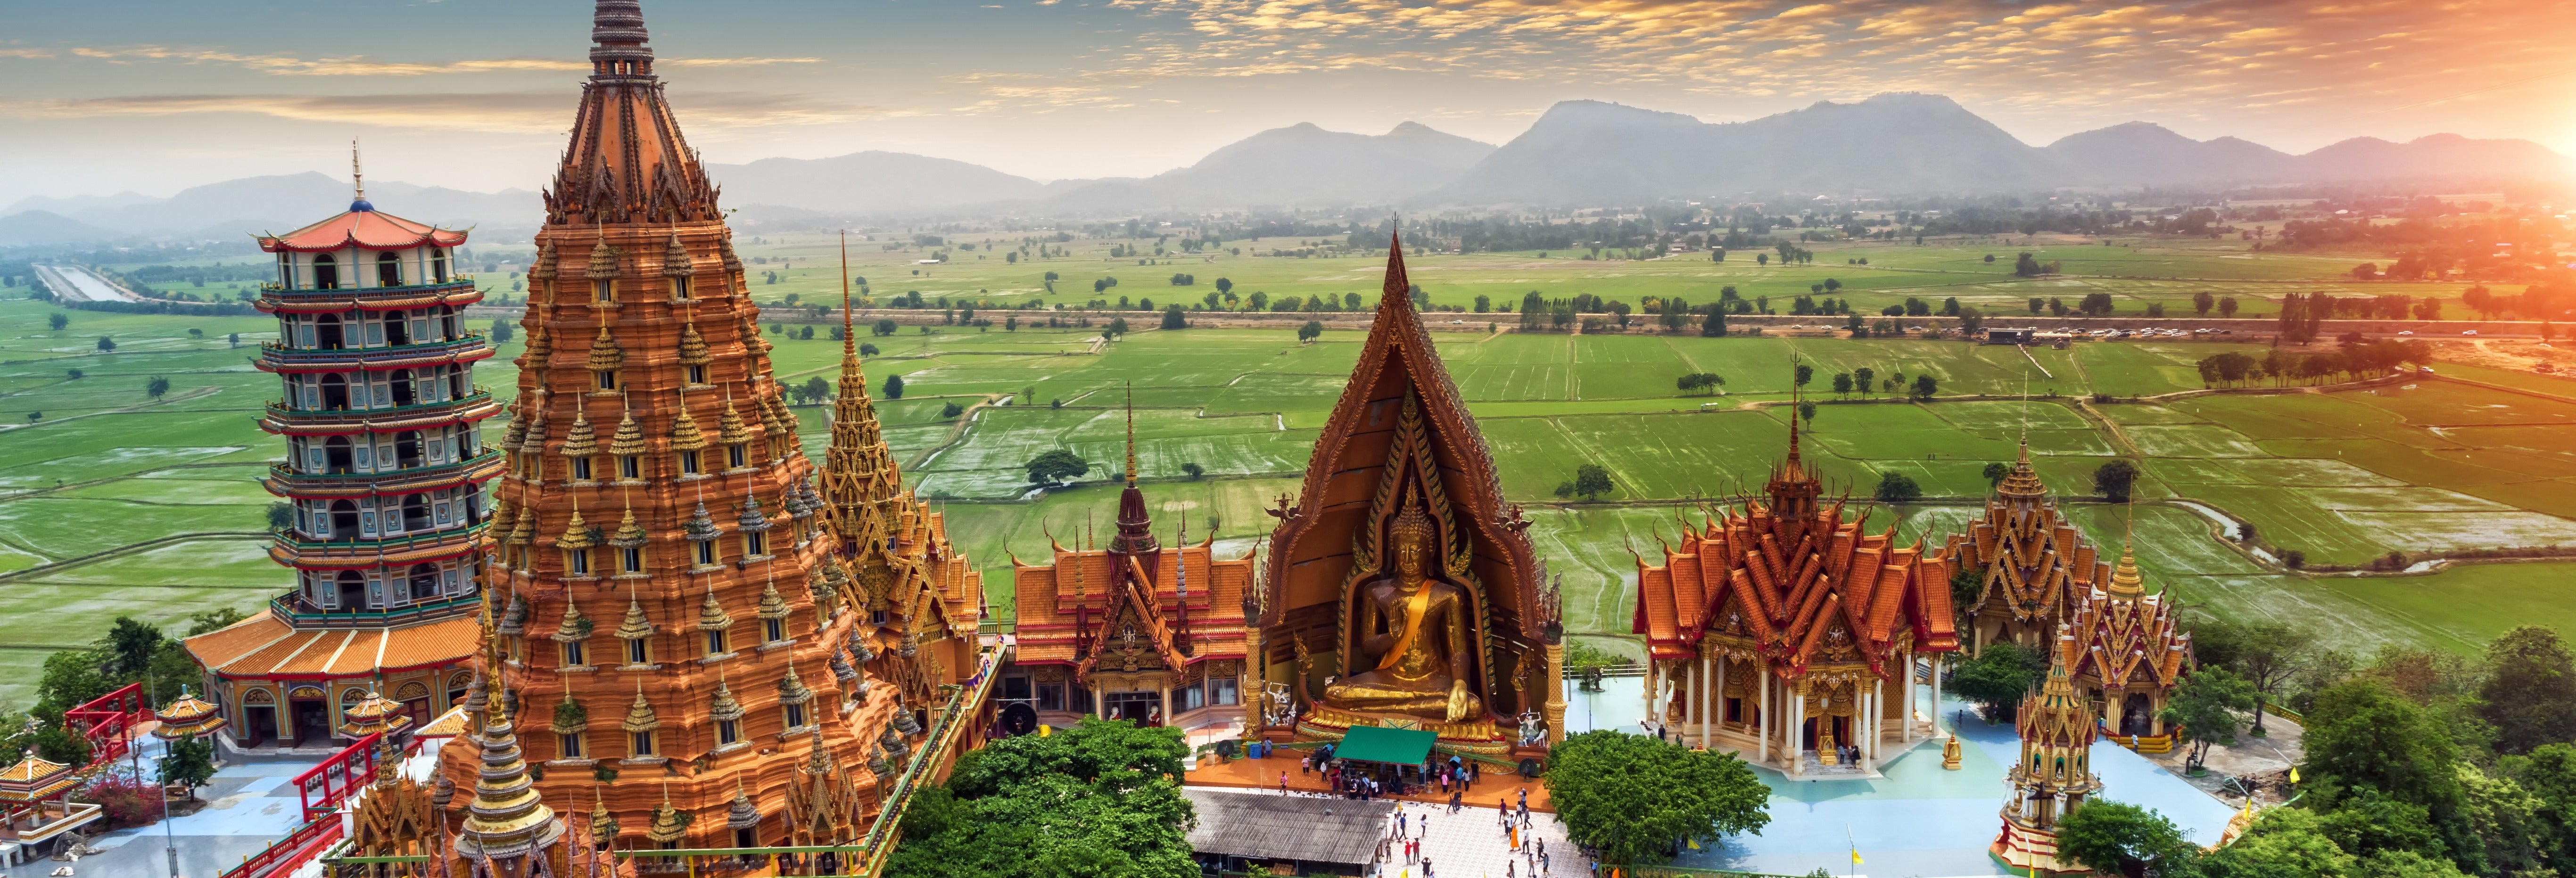 Thailand & Myanmar Tour Package: 16 Days